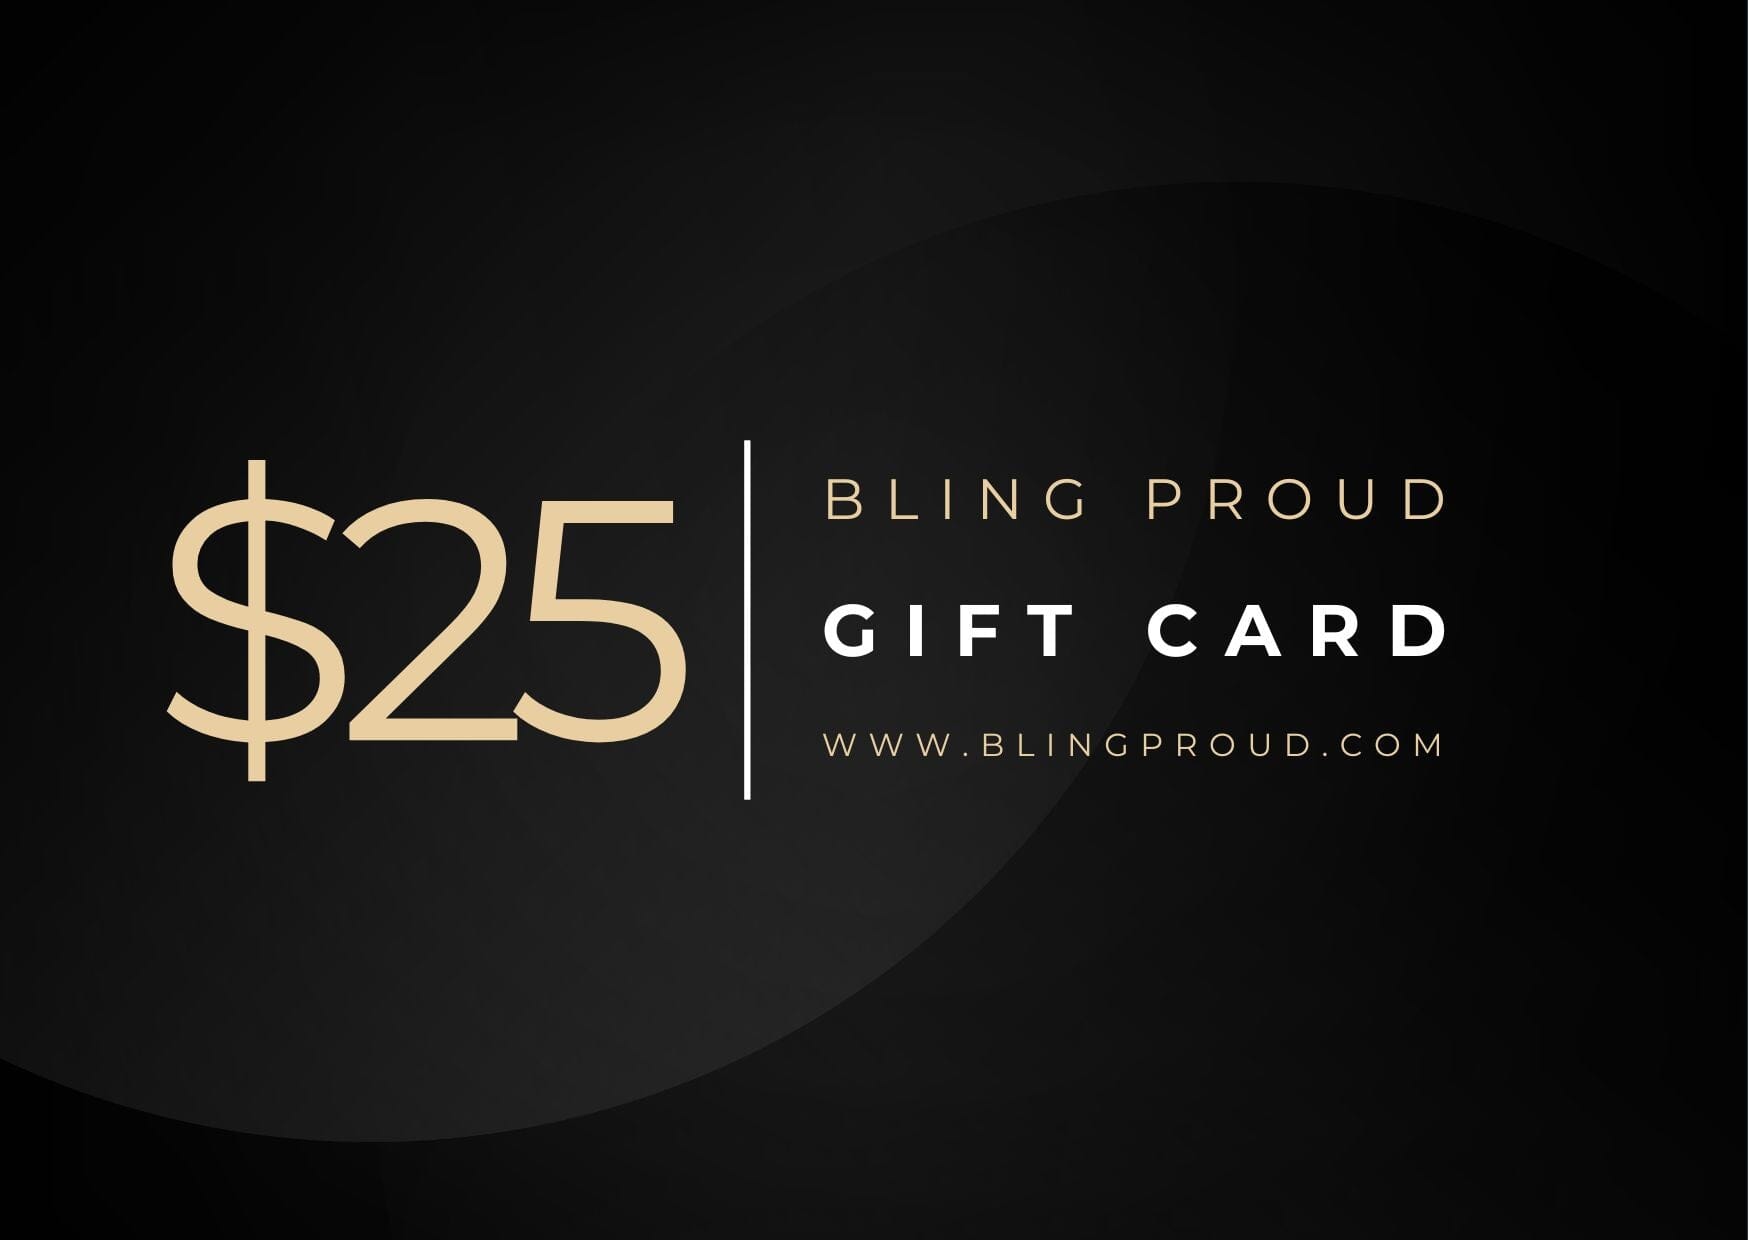 Bling Proud Gift Card $25.00 